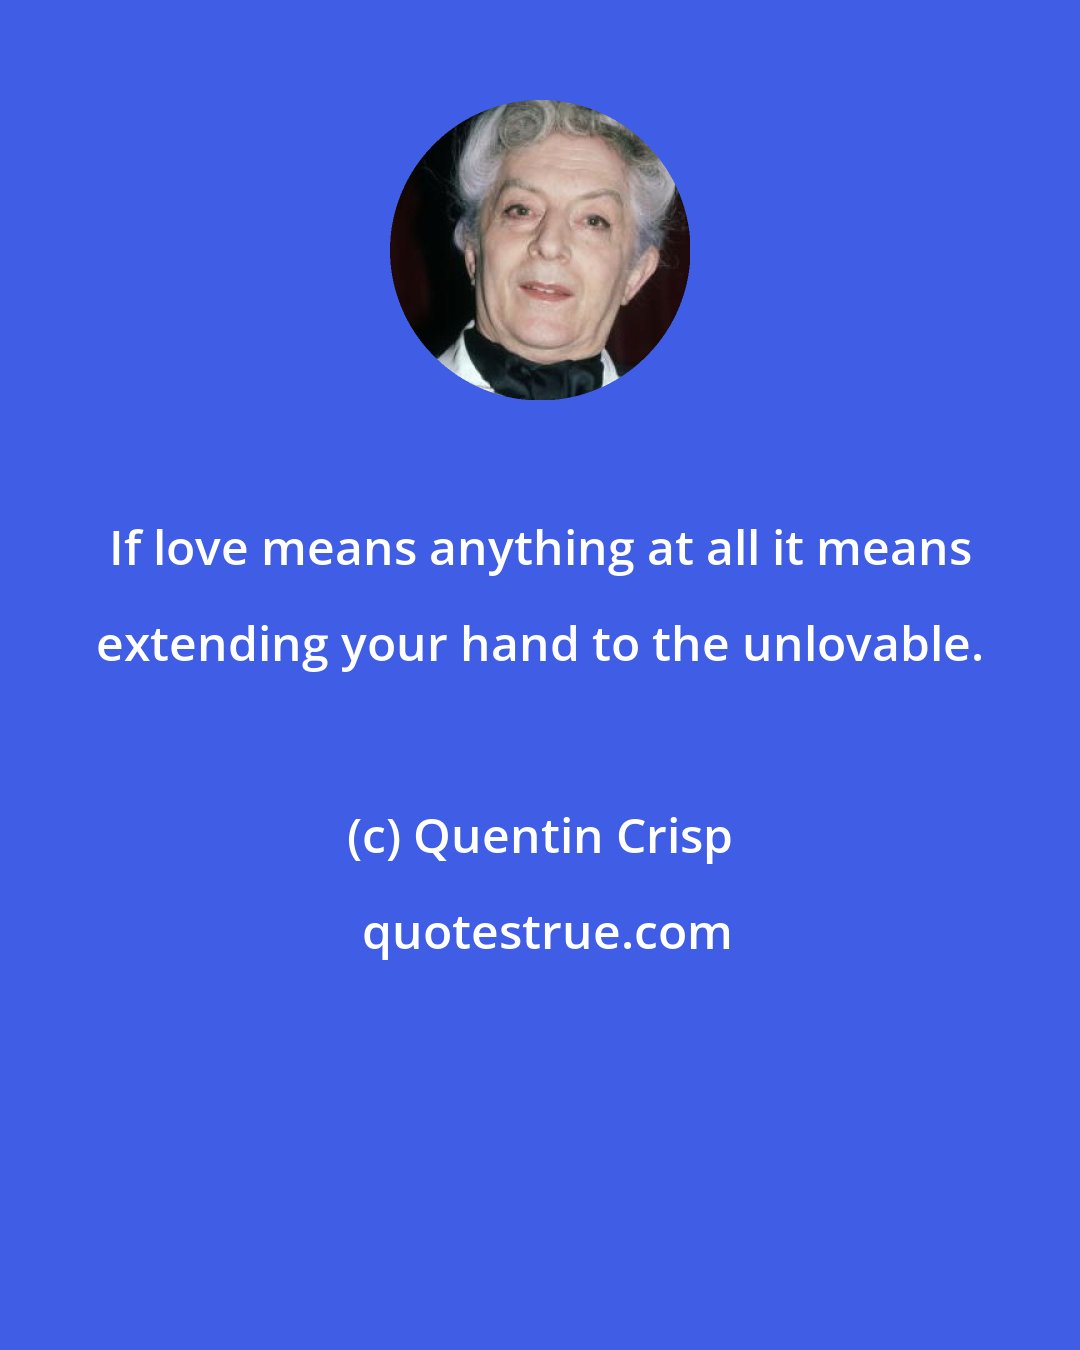 Quentin Crisp: If love means anything at all it means extending your hand to the unlovable.